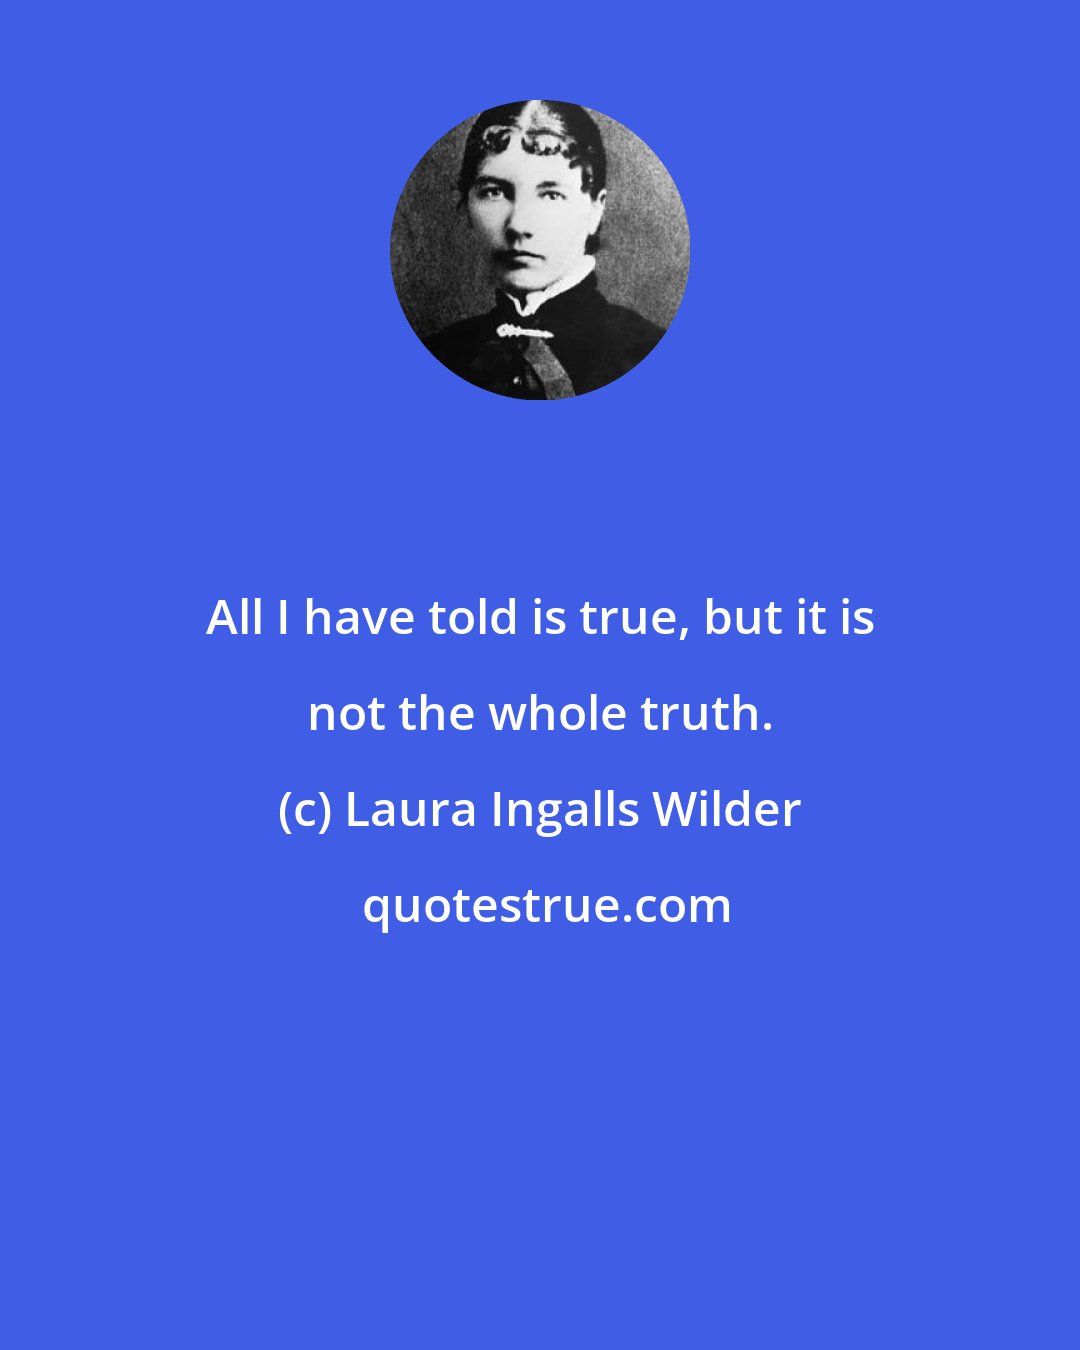 Laura Ingalls Wilder: All I have told is true, but it is not the whole truth.